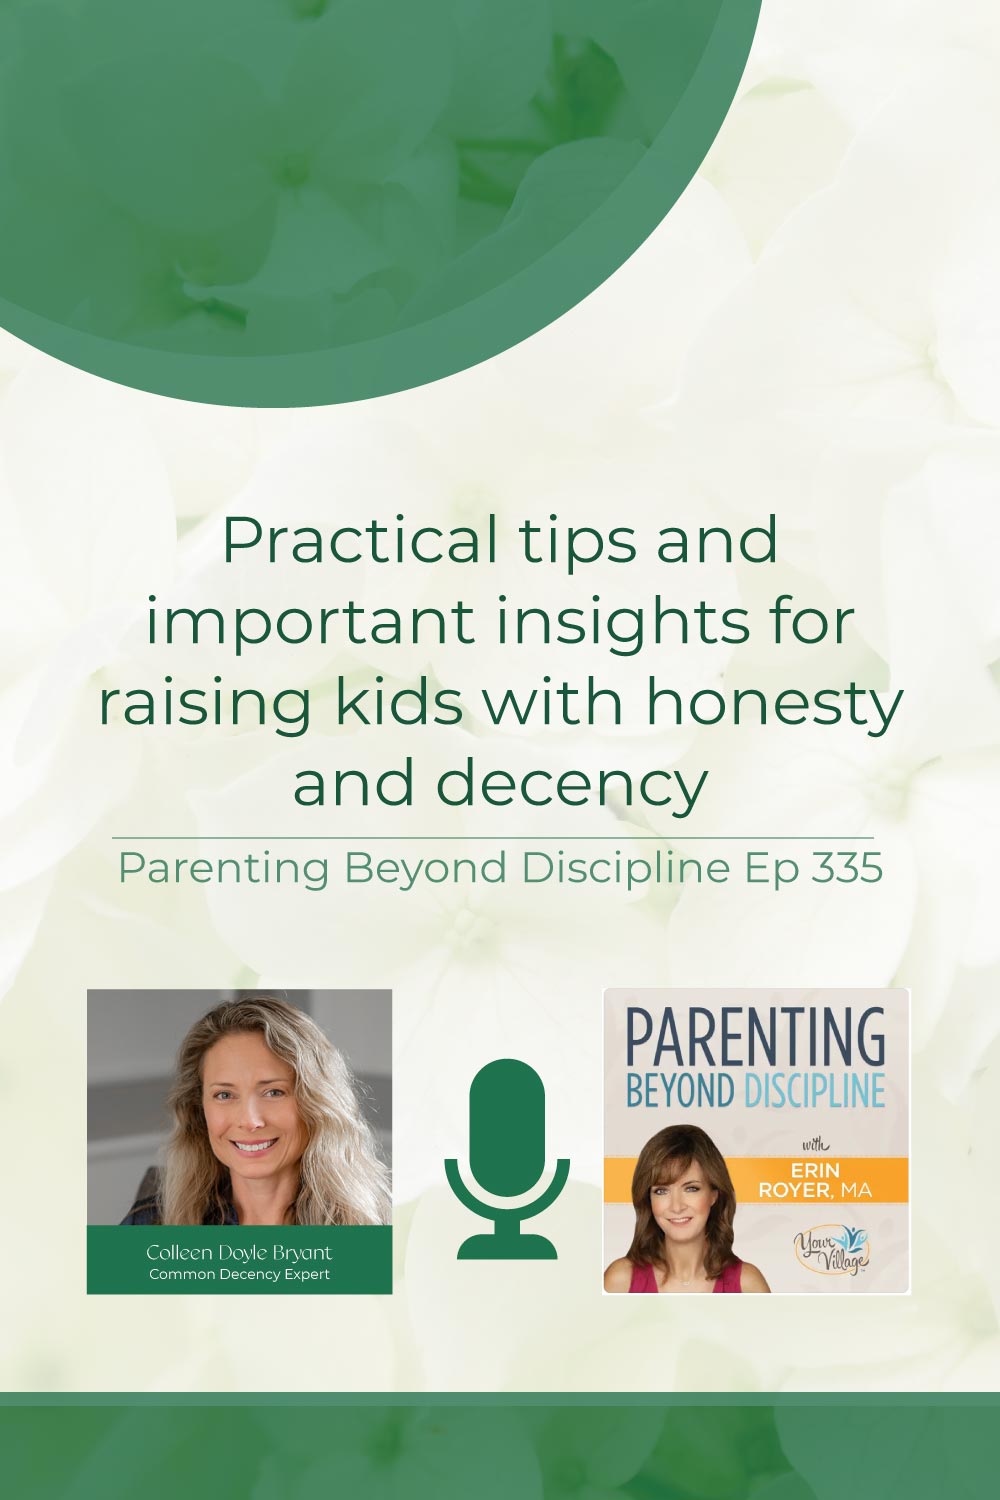 Tips for raising kids and teens with honesty and decency - on Parenting Beyond Discipline Podcast